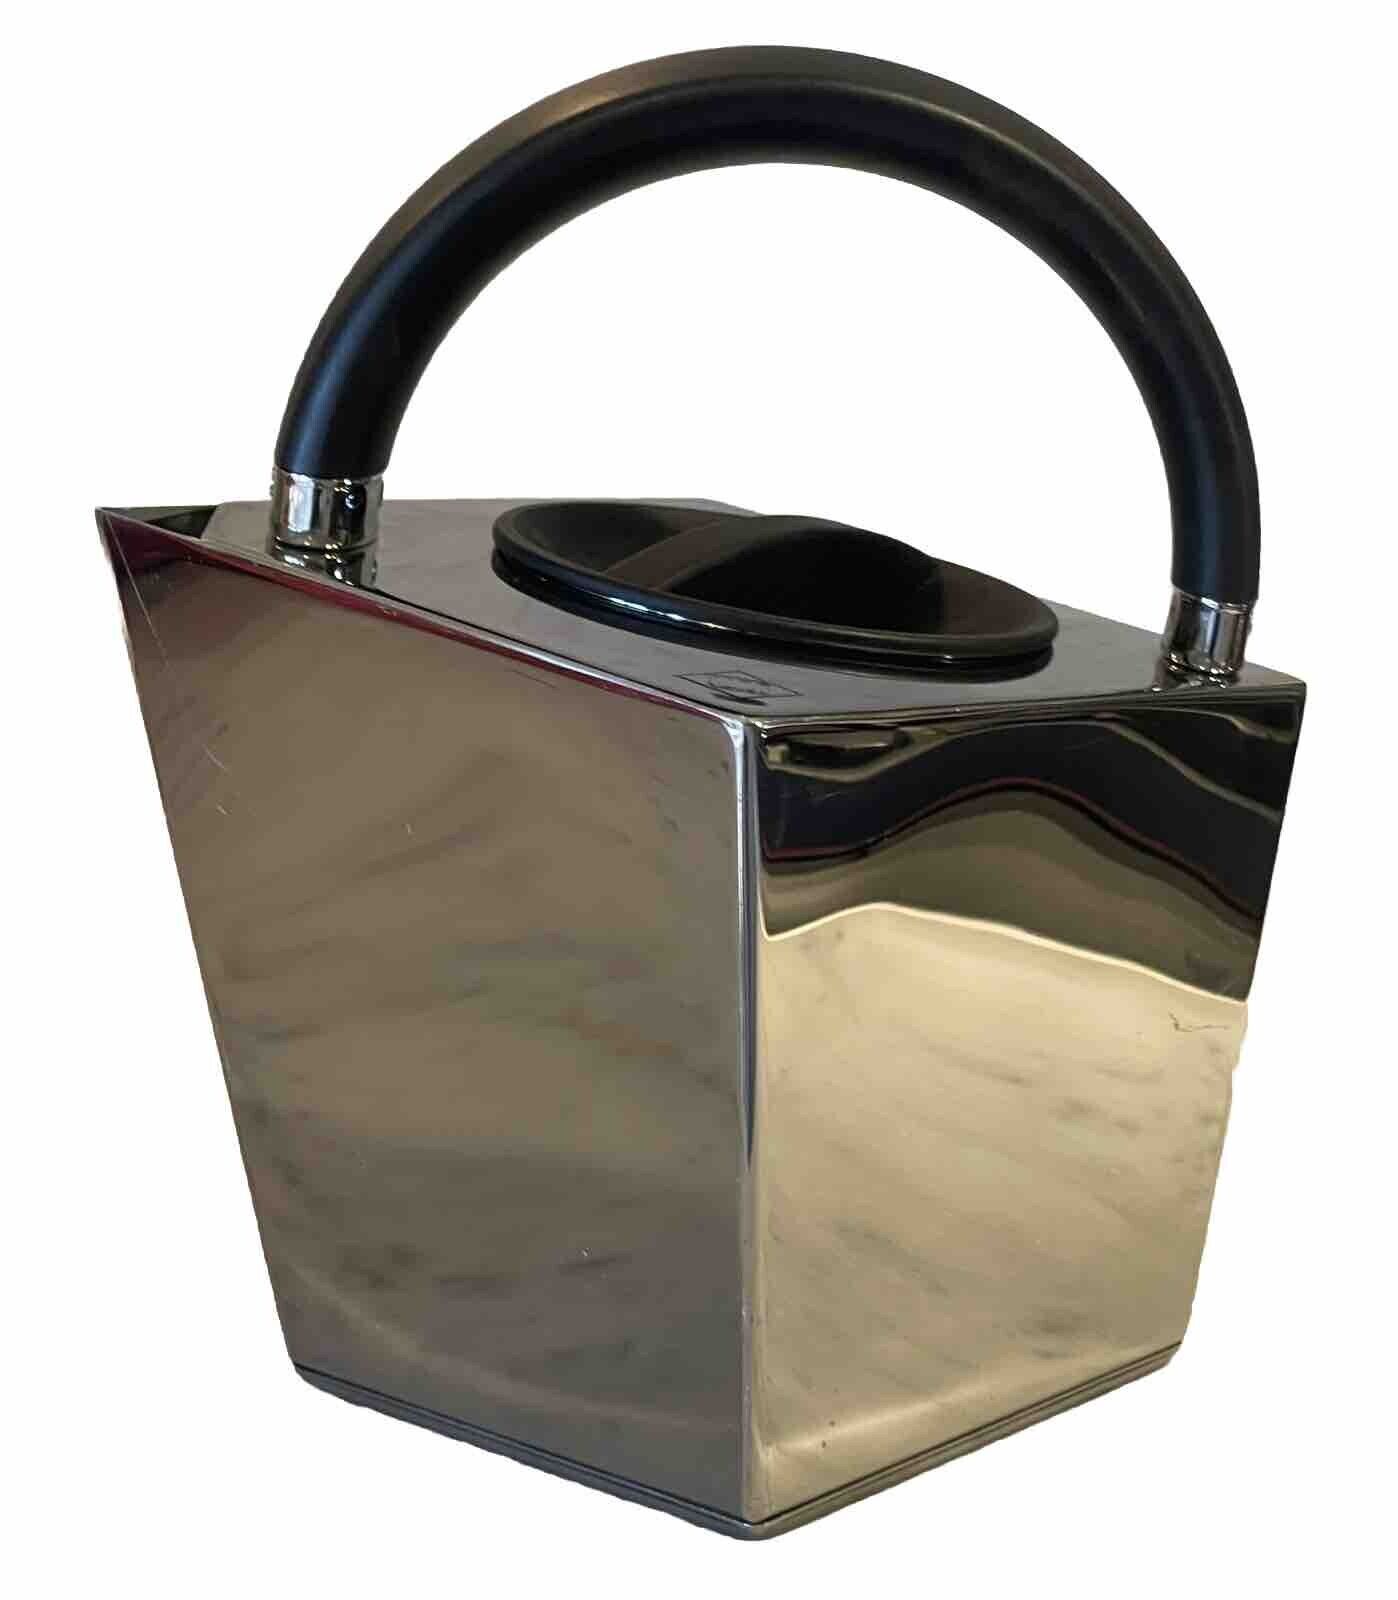 Modernist Cubist Stainless Tea Kettle by Luca Trazzi for Viceversa Milan 1990s